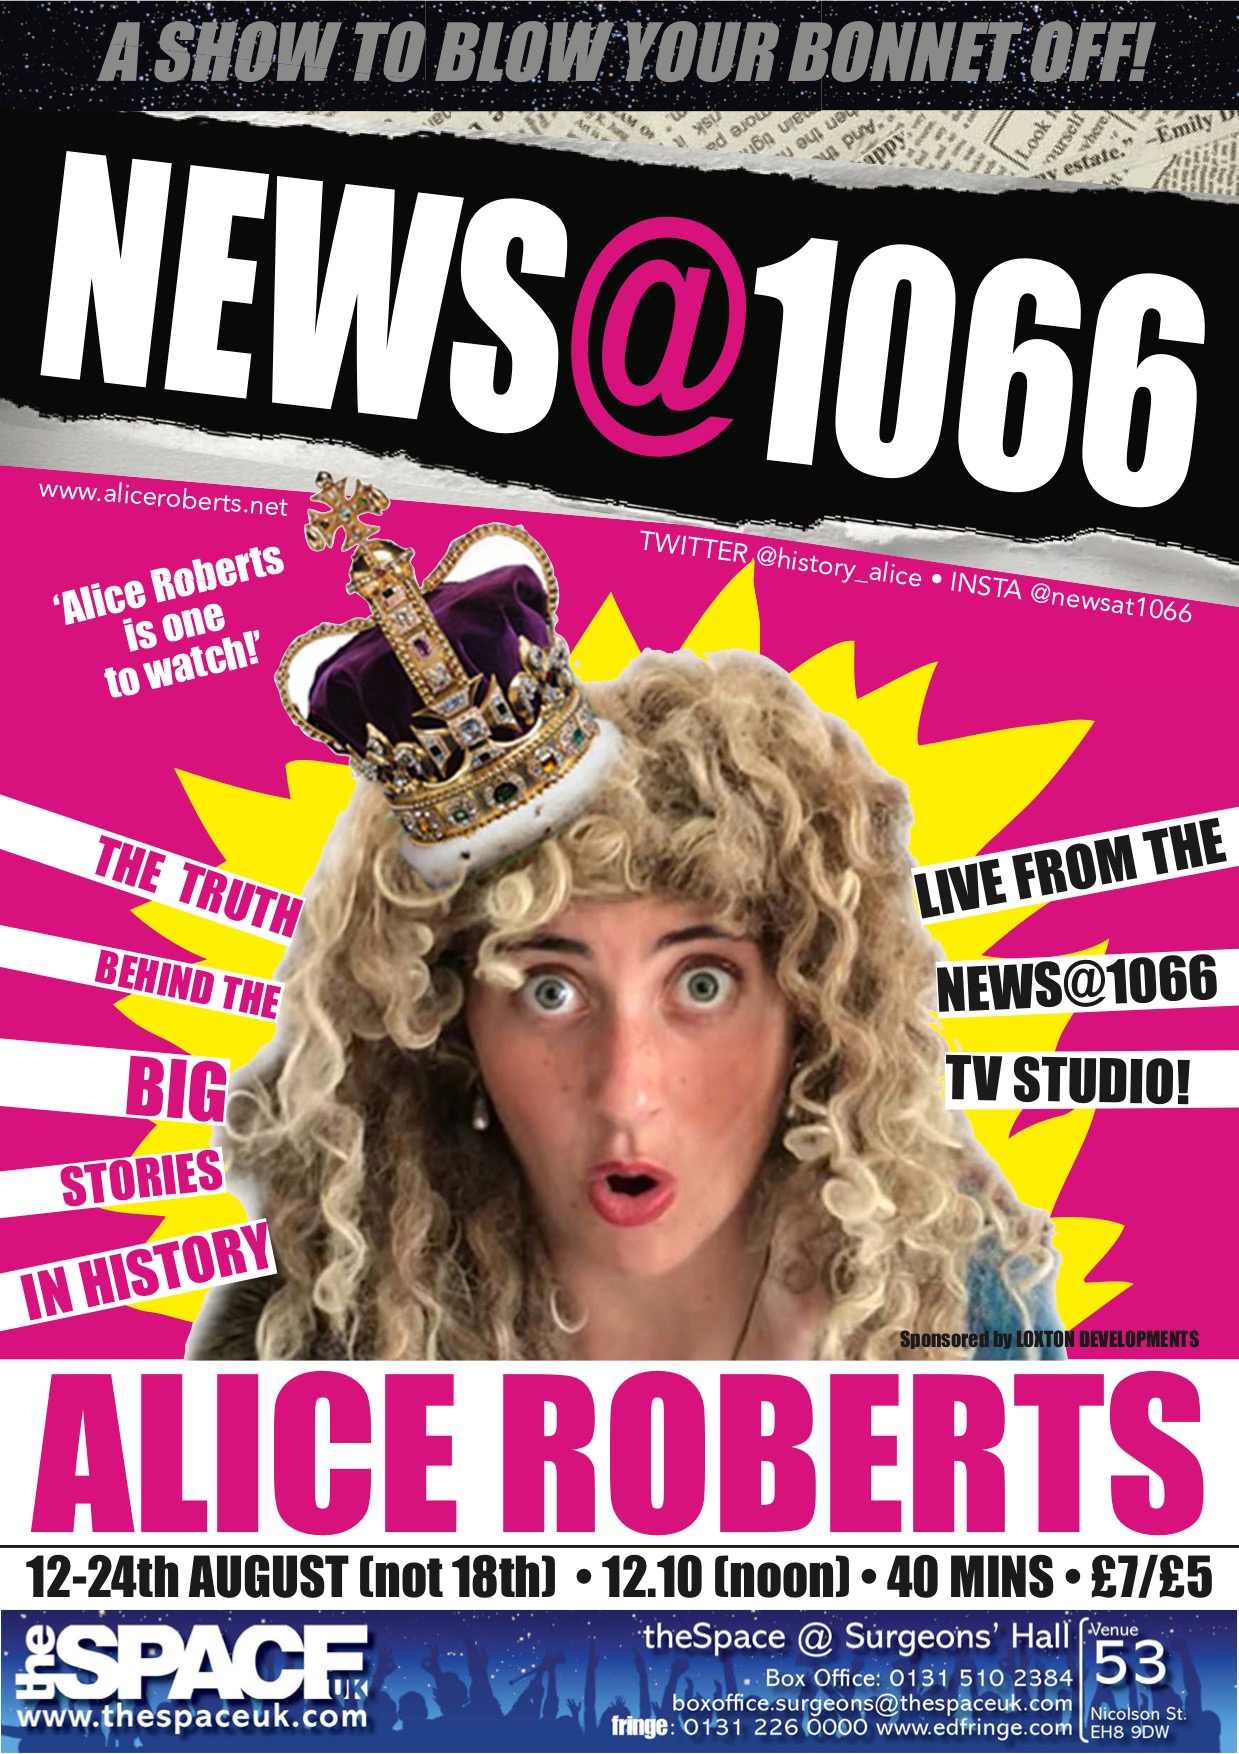 The poster for News@1066